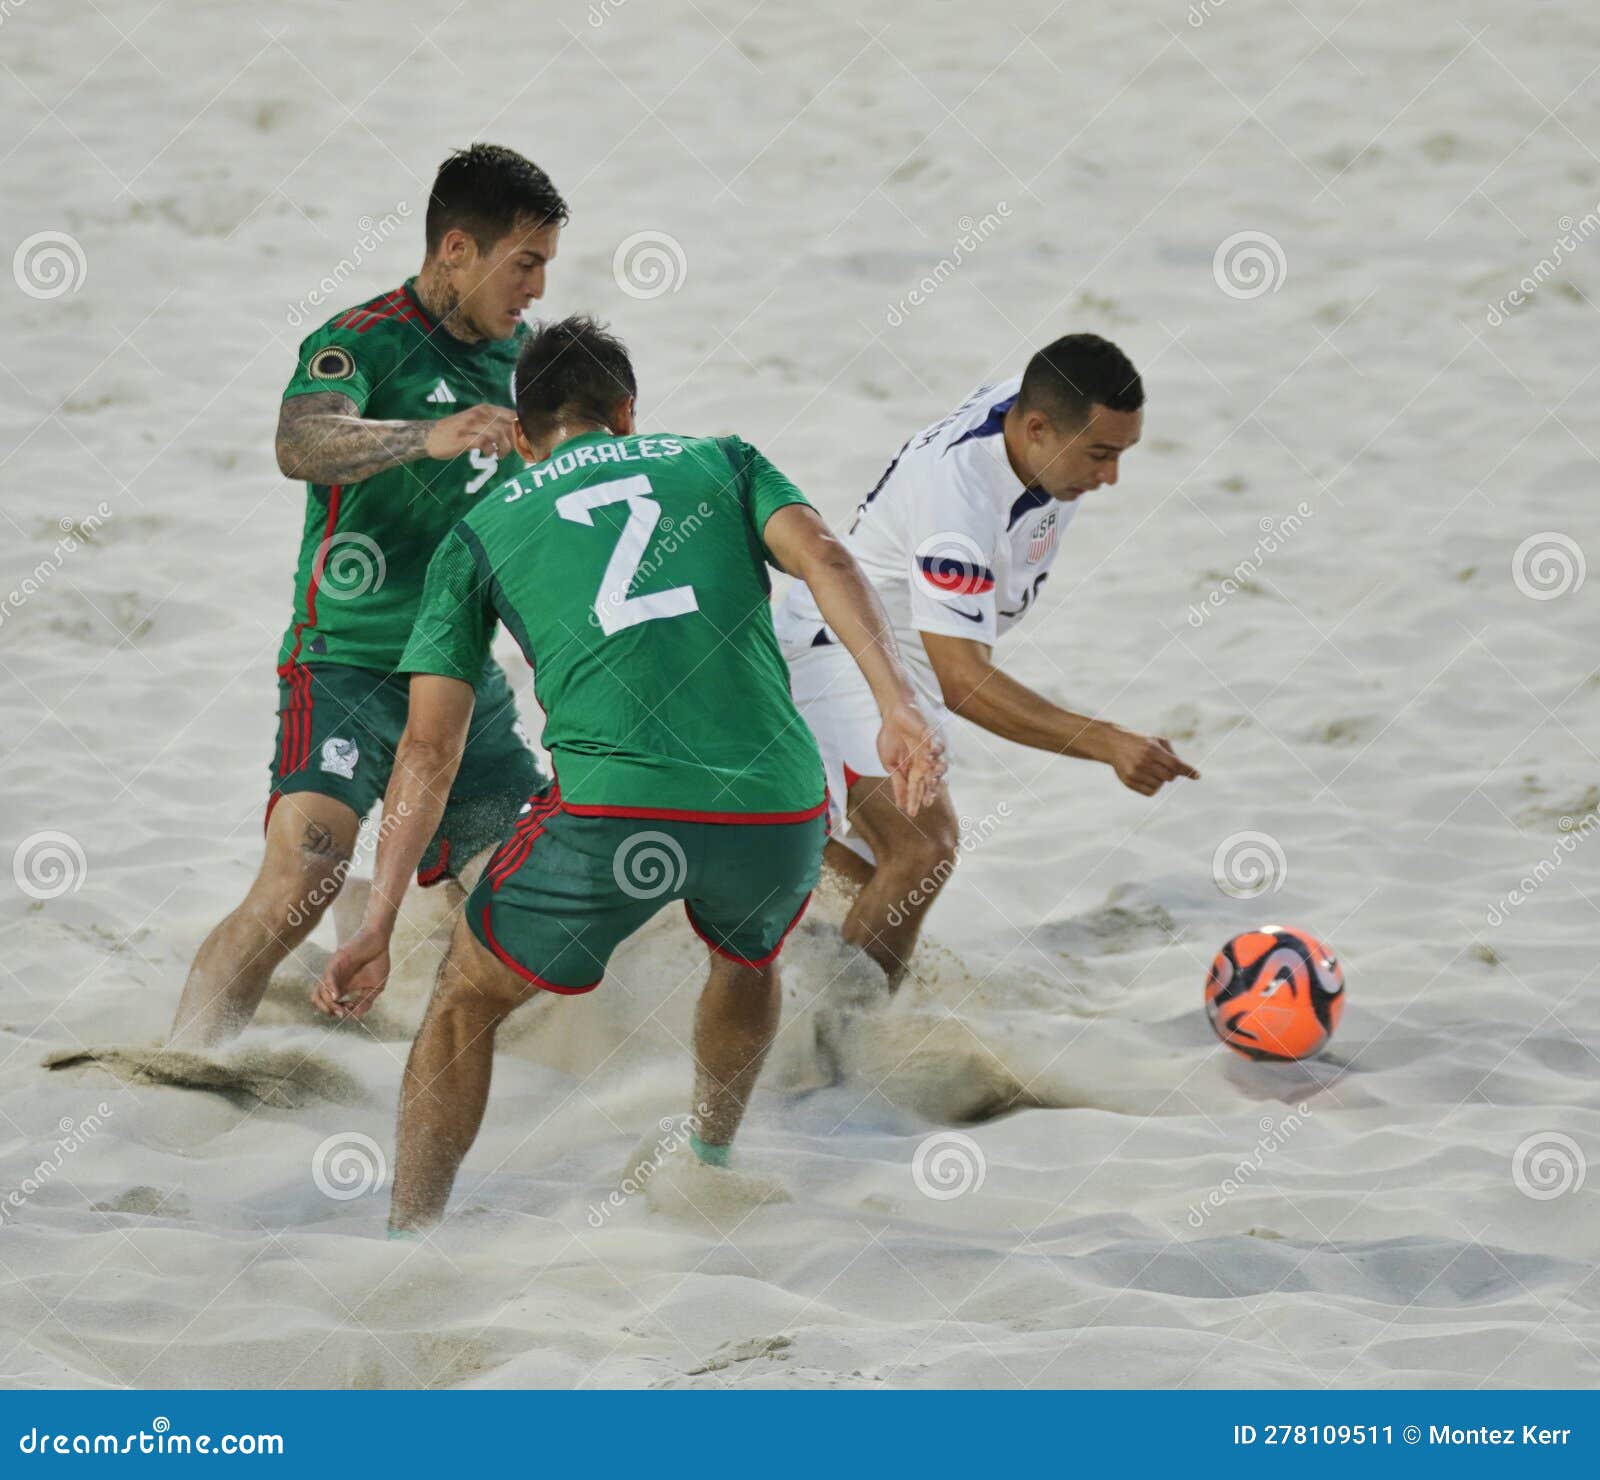 USA Tops Mexico 50 for Beach Soccer Title in the CONCACAF Beach Soccer